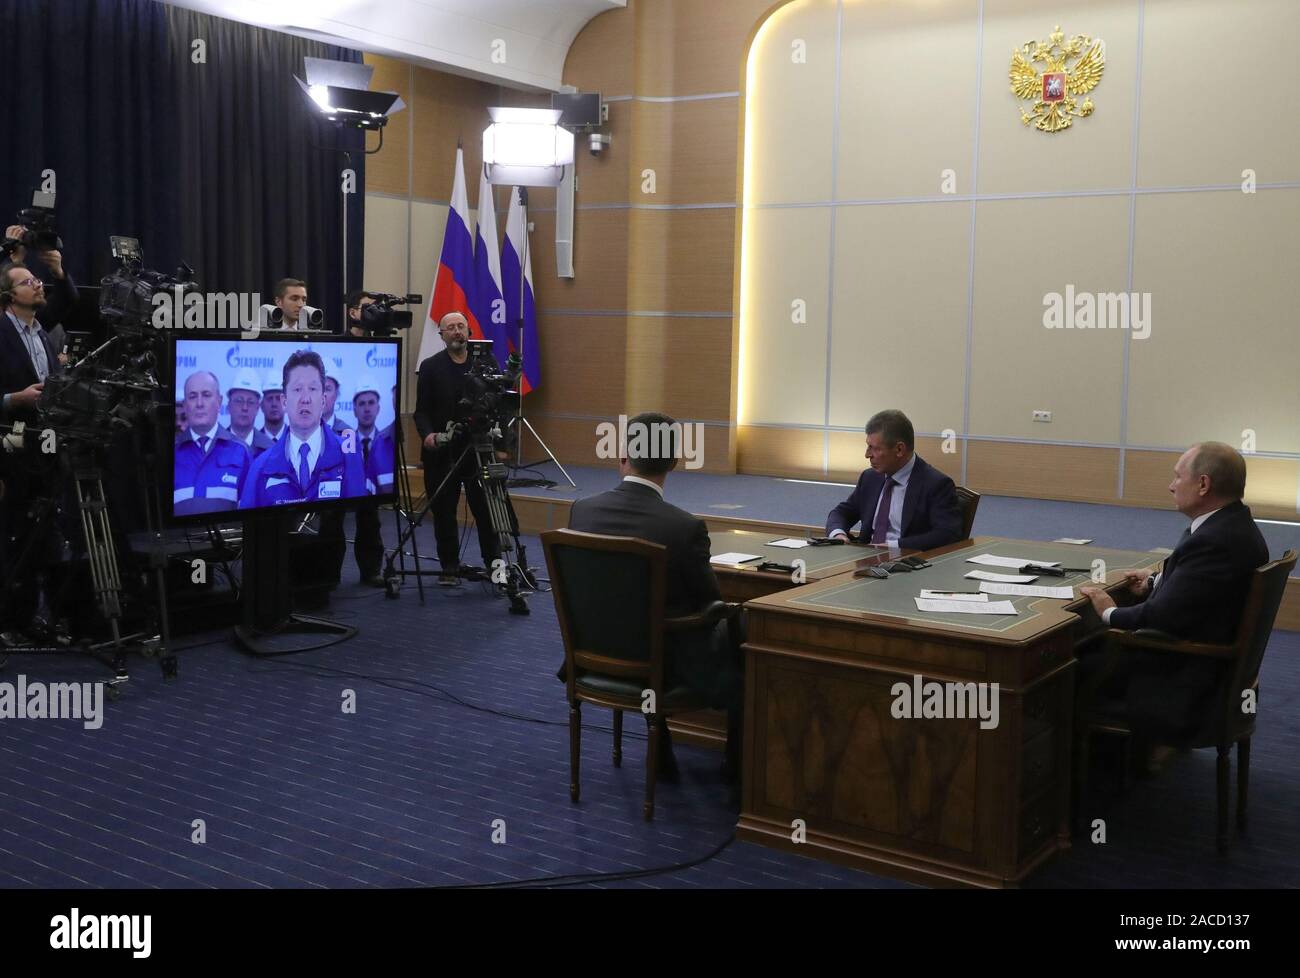 (191202) -- BEIJING, Dec. 2, 2019 (Xinhua) -- Russian President Vladimir Putin (1st R), Russian Energy Minister Alexander Novak (L) and Deputy Prime Minister Dmitry Kozak (2nd R) watch the launching ceremony of the China-Russia east-route natural gas pipeline via teleconference in Sochi, Russia, Dec. 2, 2019. (Sputnik/Handout via Xinhua) Stock Photo